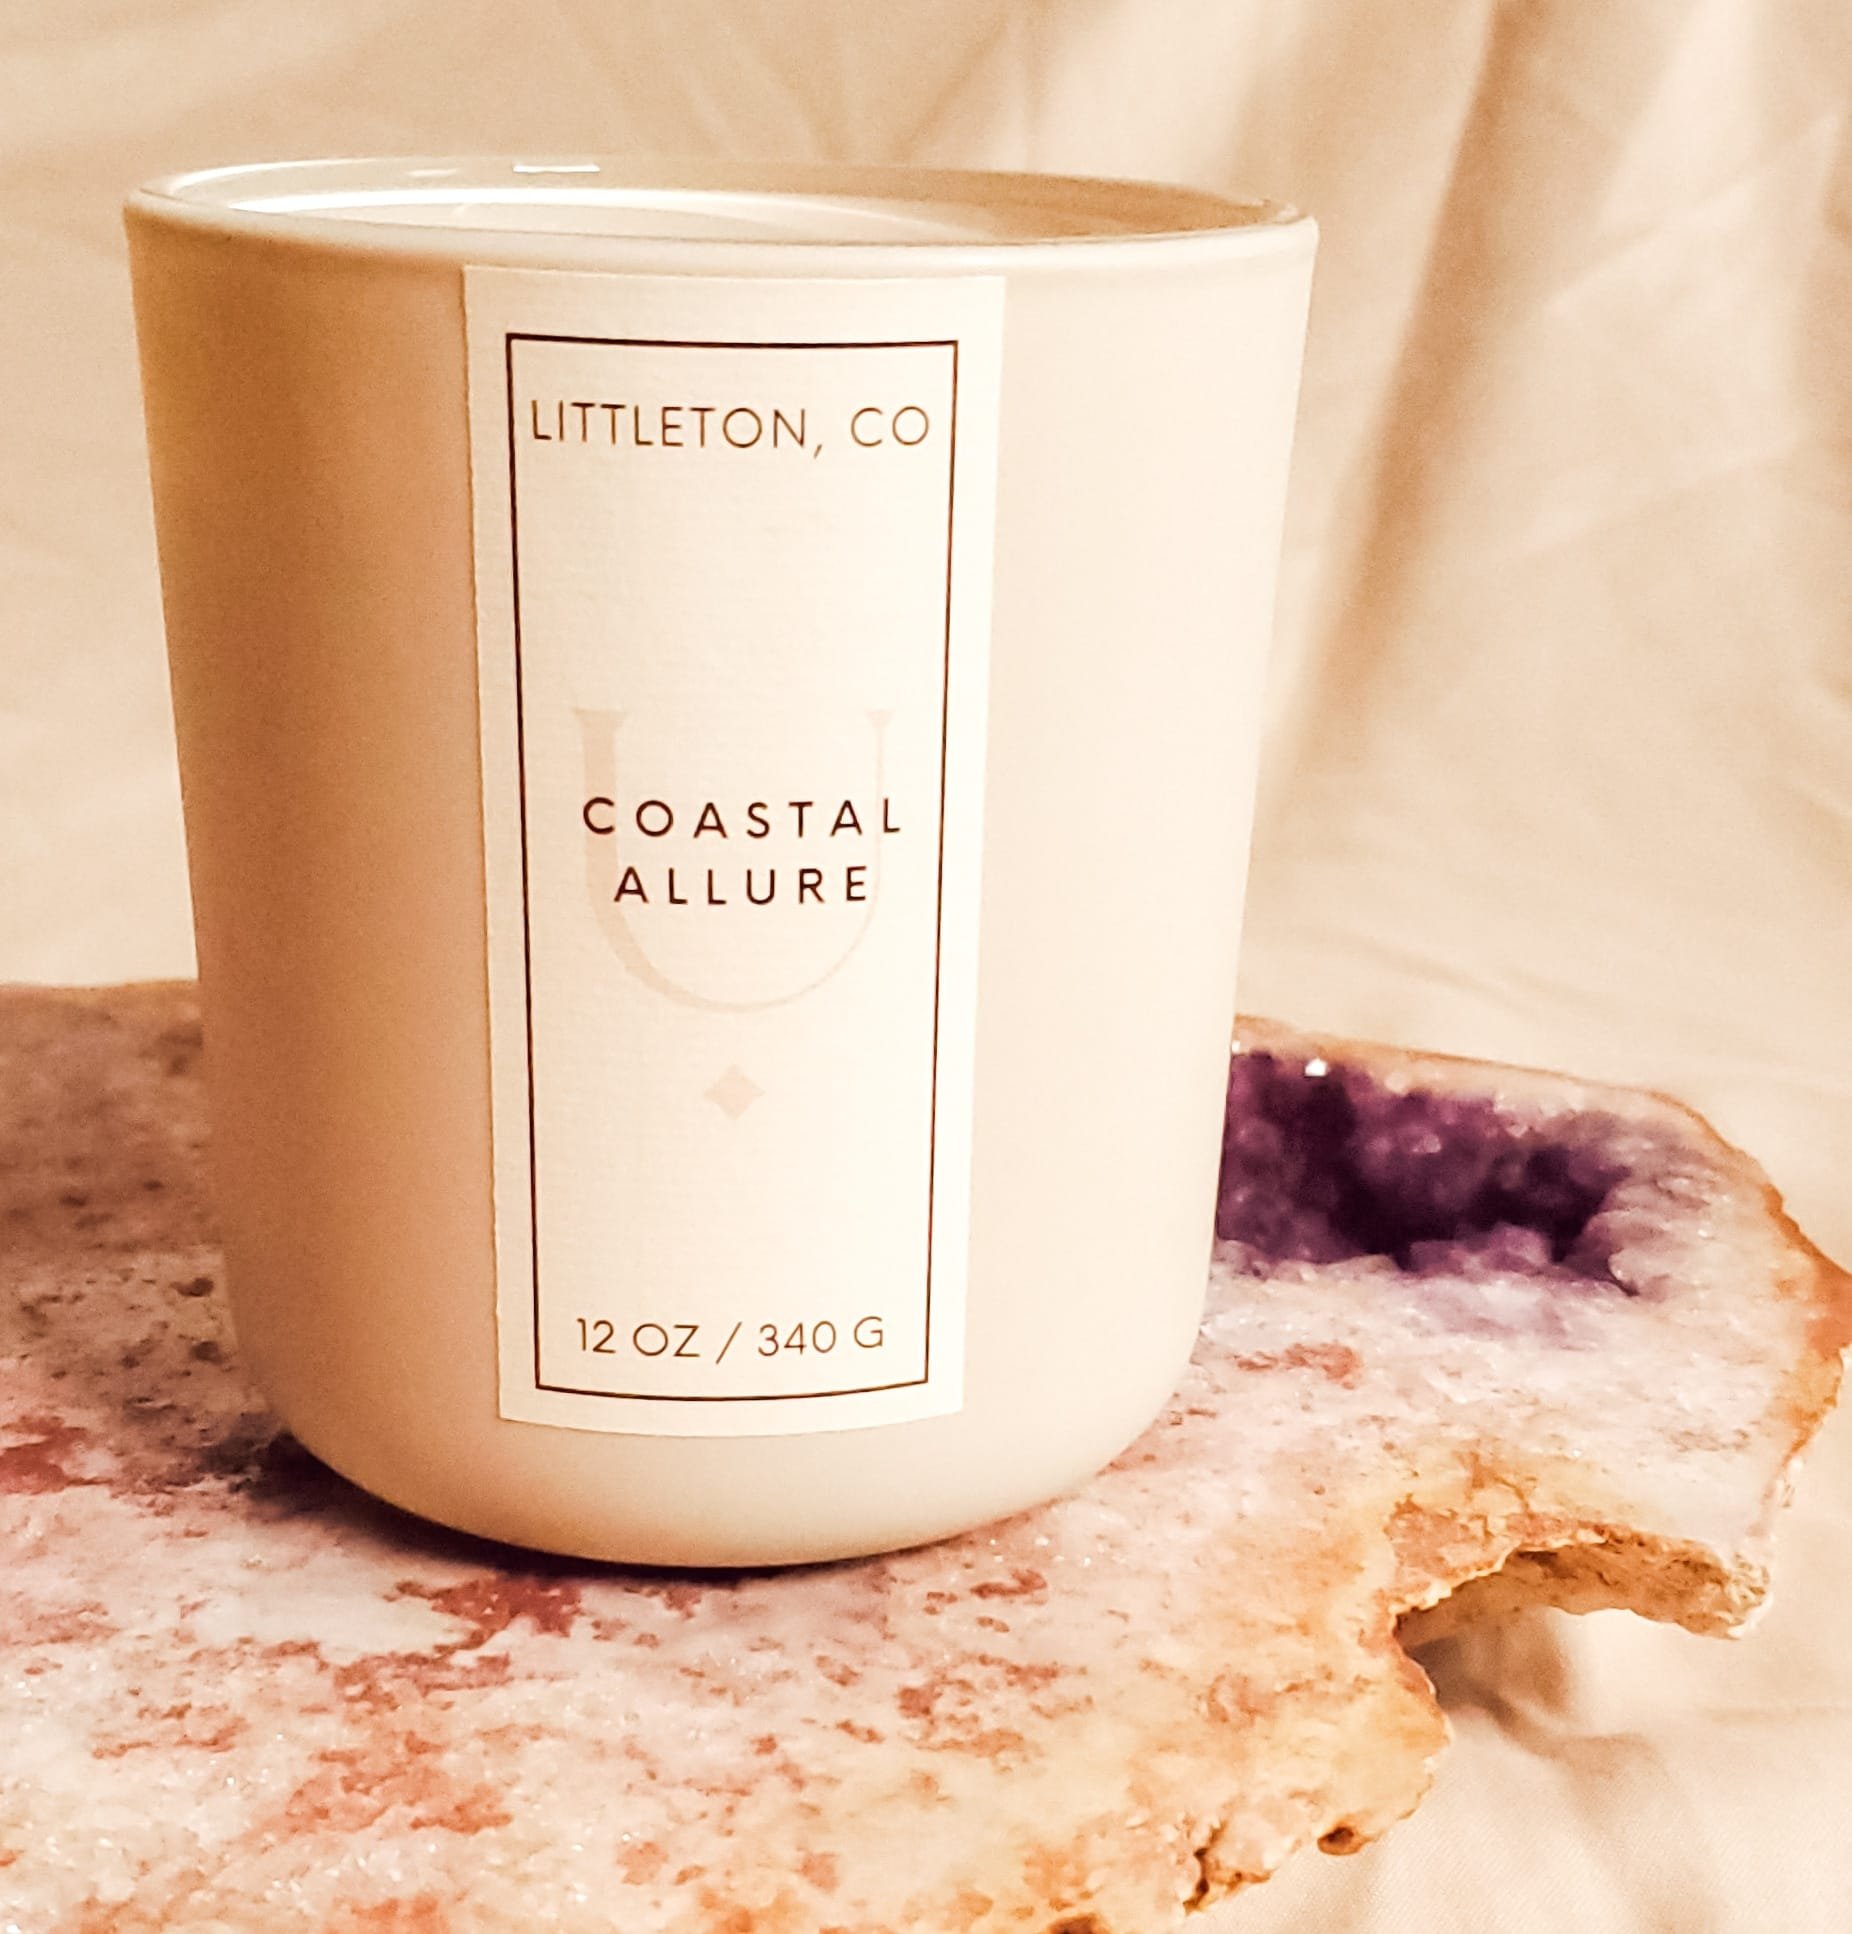 Thymes Wildwood Candle Collection – Mini Reviews – EauMG